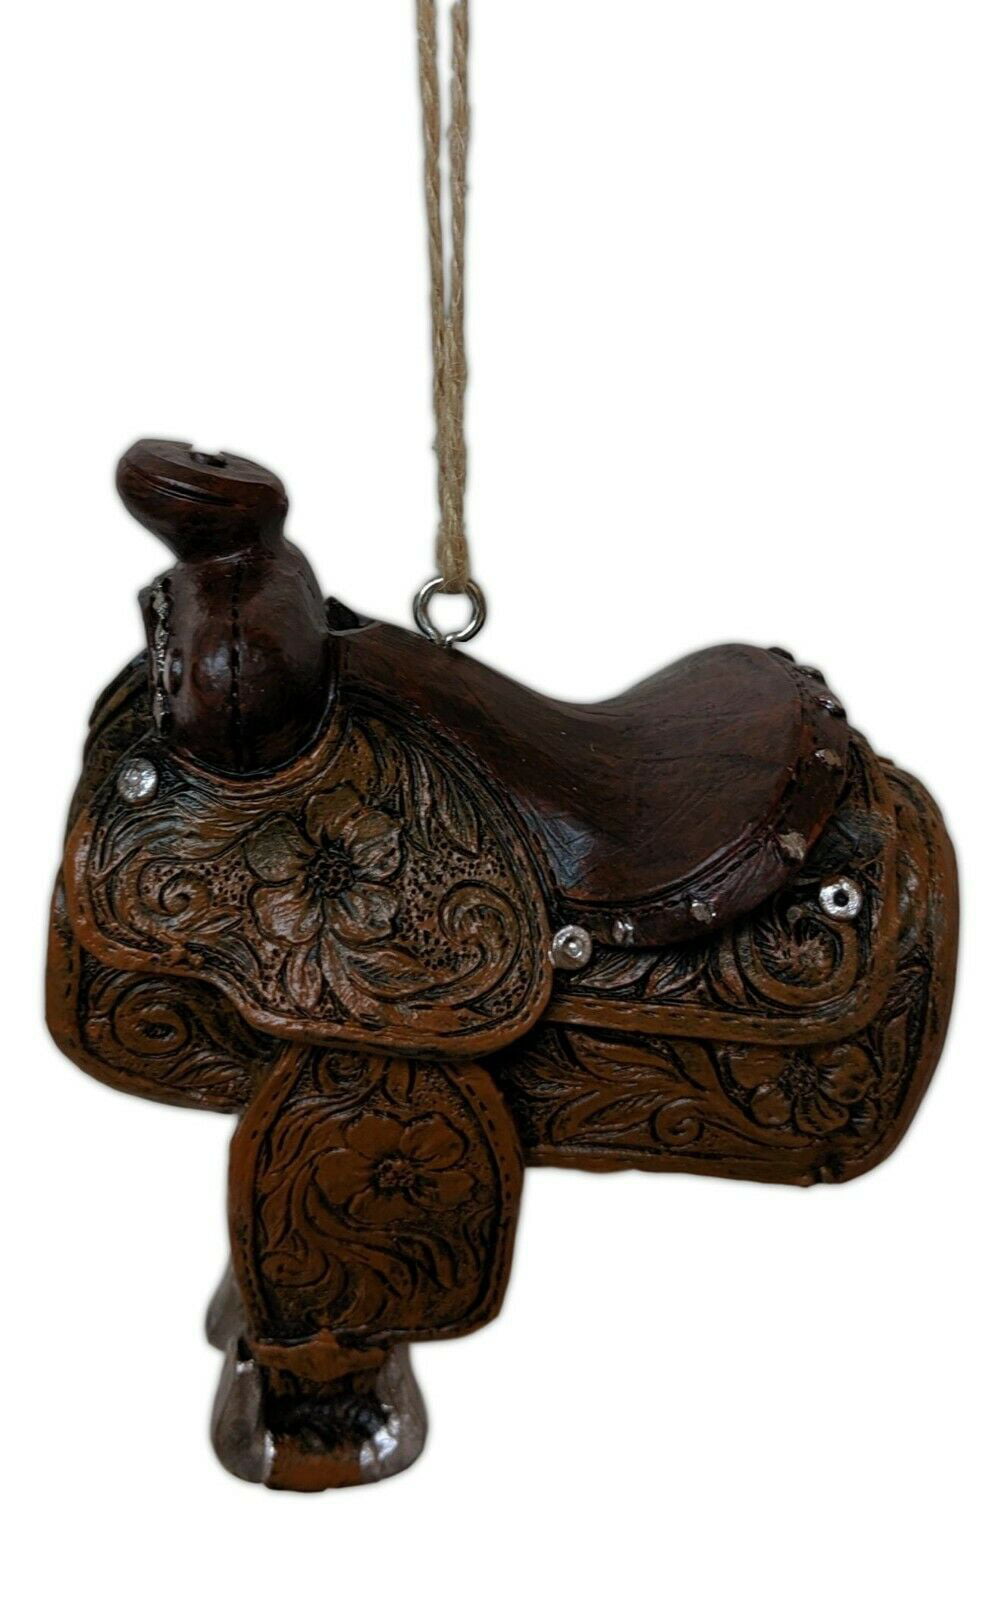 by Wilcor WESTERN SADDLE Resin Christmas Ornament Intricate Detail